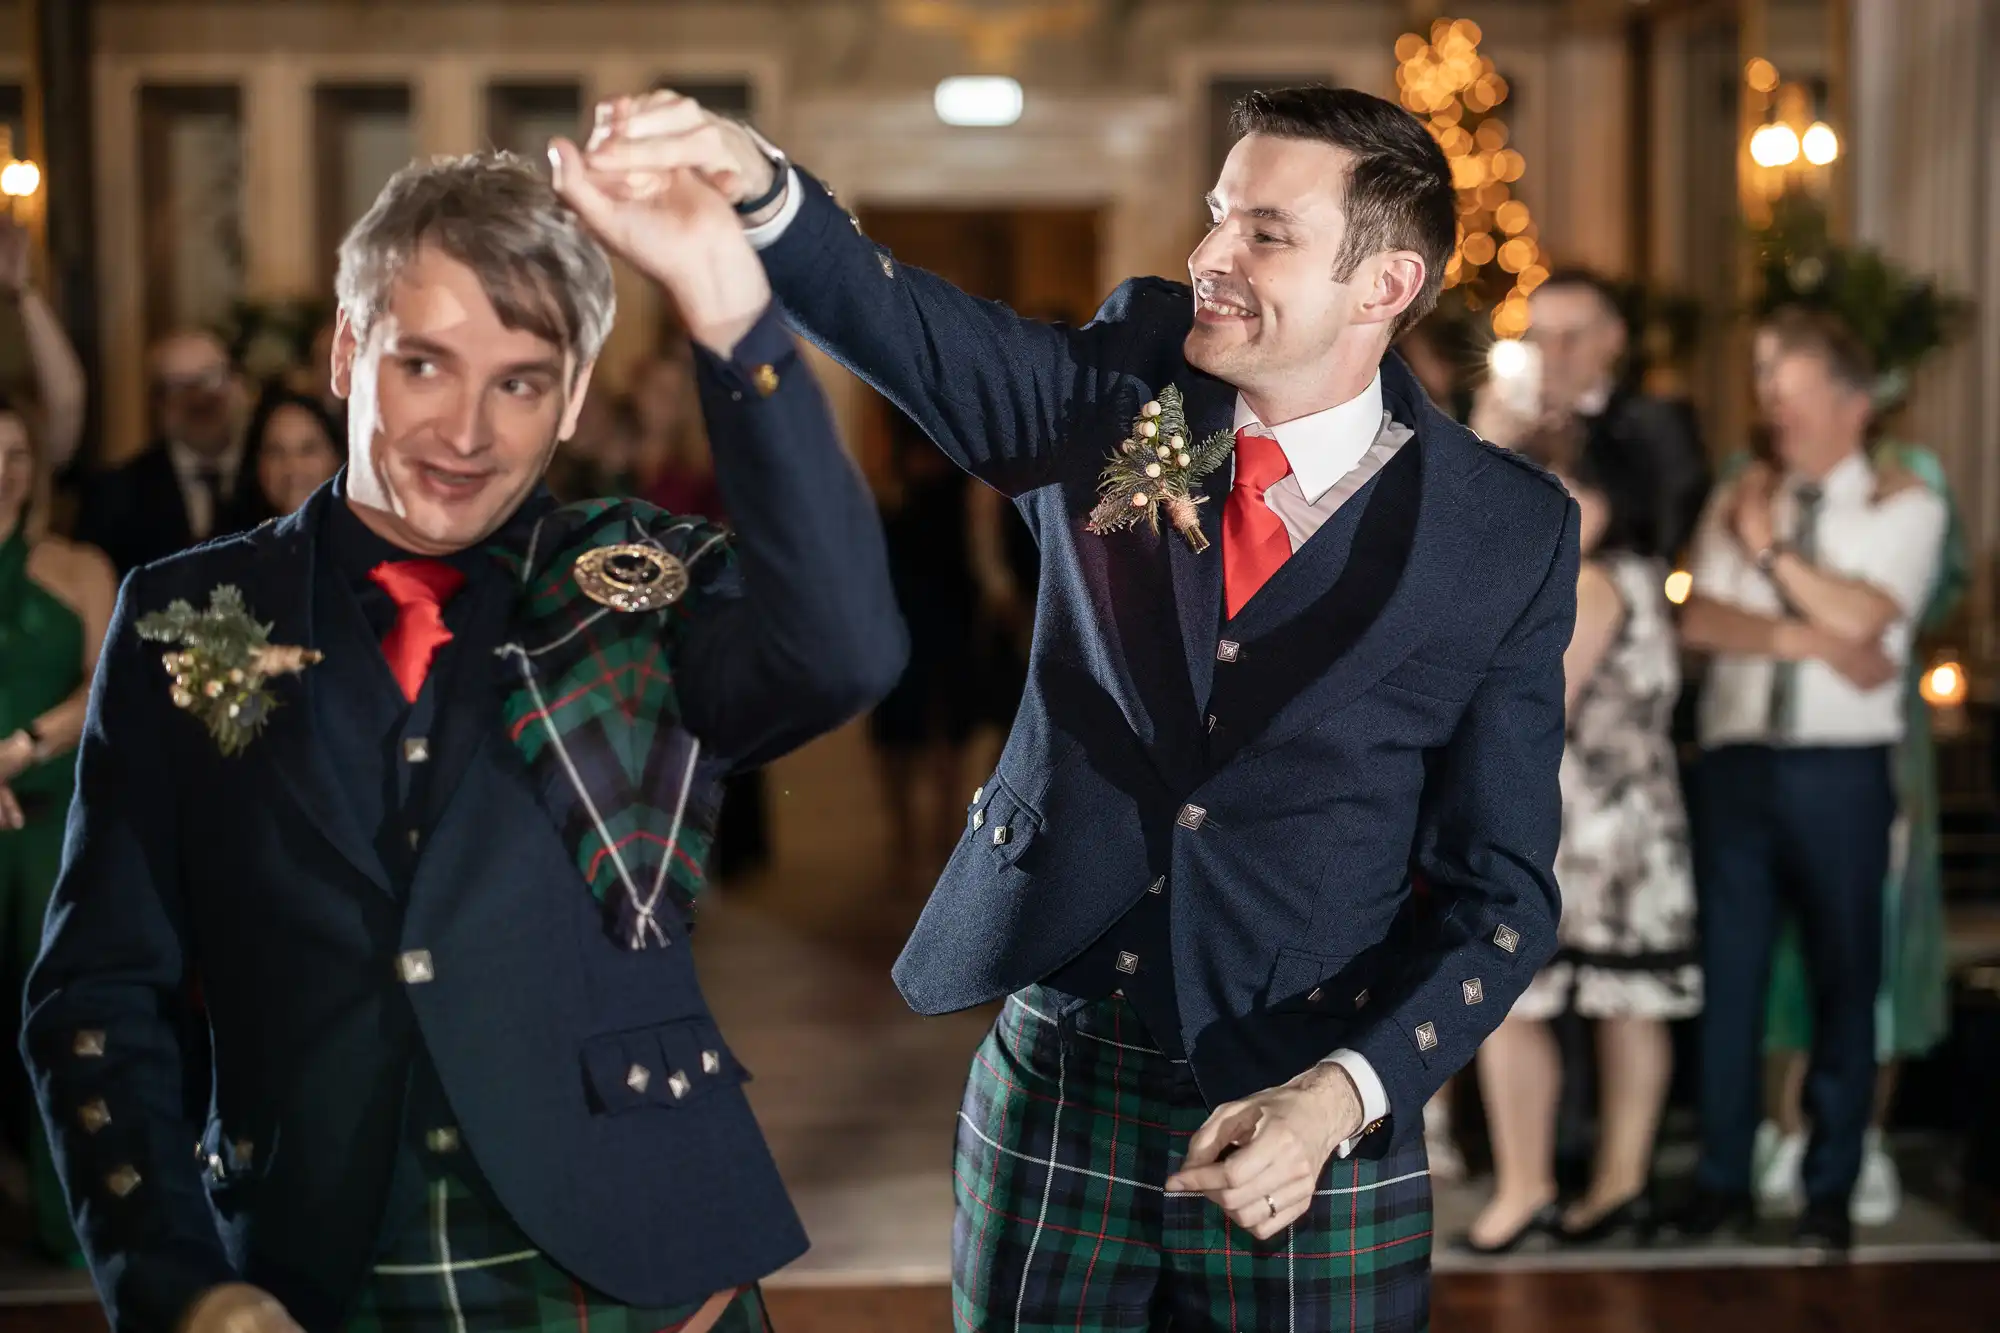 Two men dressed in formal Scottish attire dance together at an indoor event with a cheering crowd in the background.